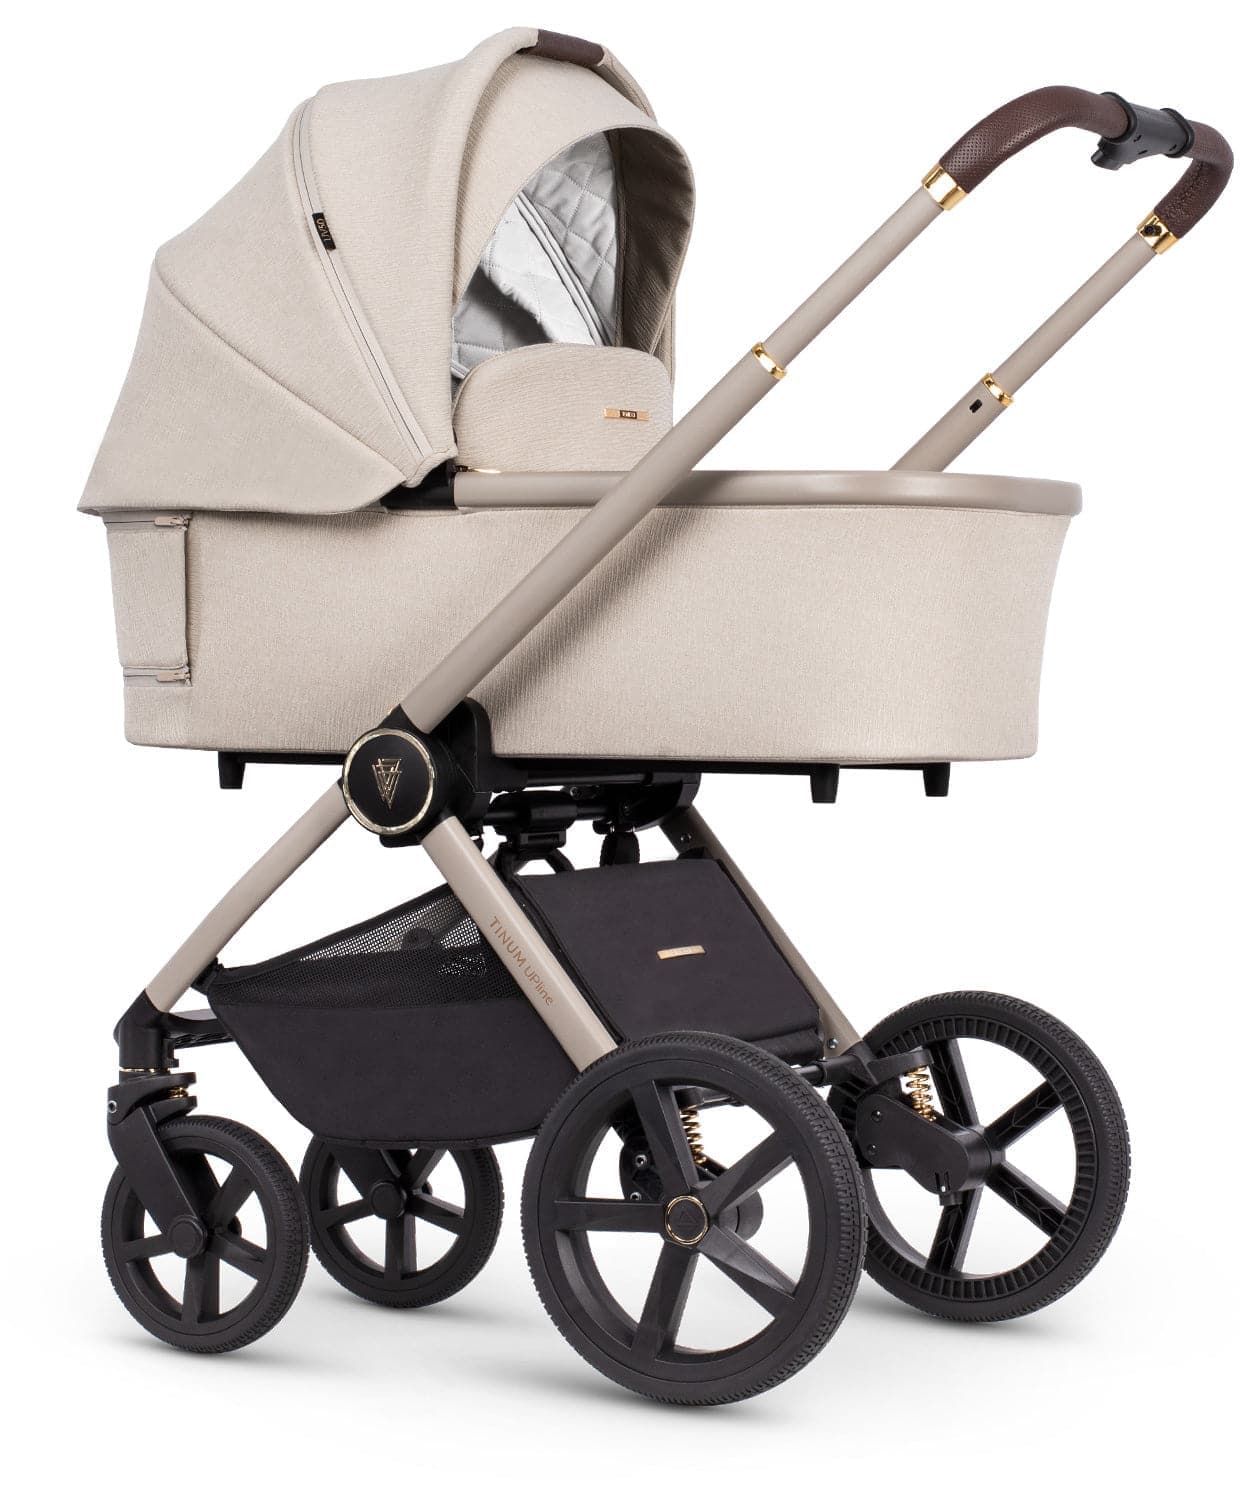 Venicci Tinum Upline 3 In 1 Travel System - Stone Beige - For Your Little One